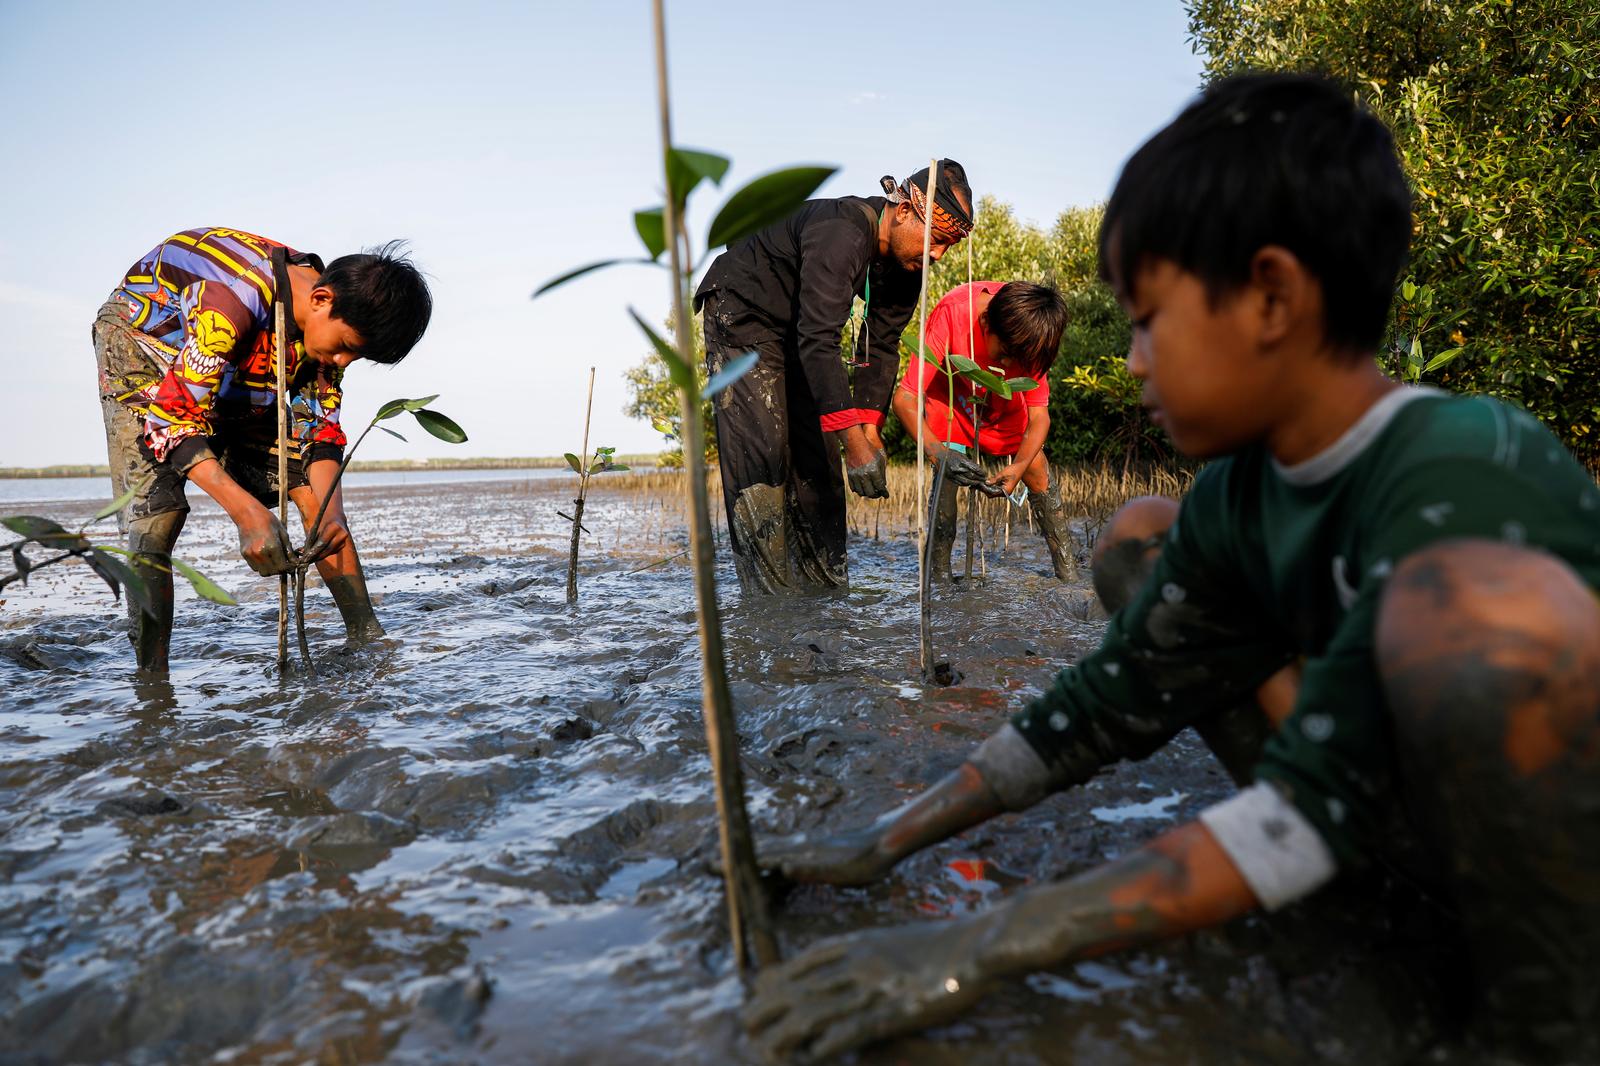 With stories and puppets, environmentalist battles to save Indonesia's mangroves